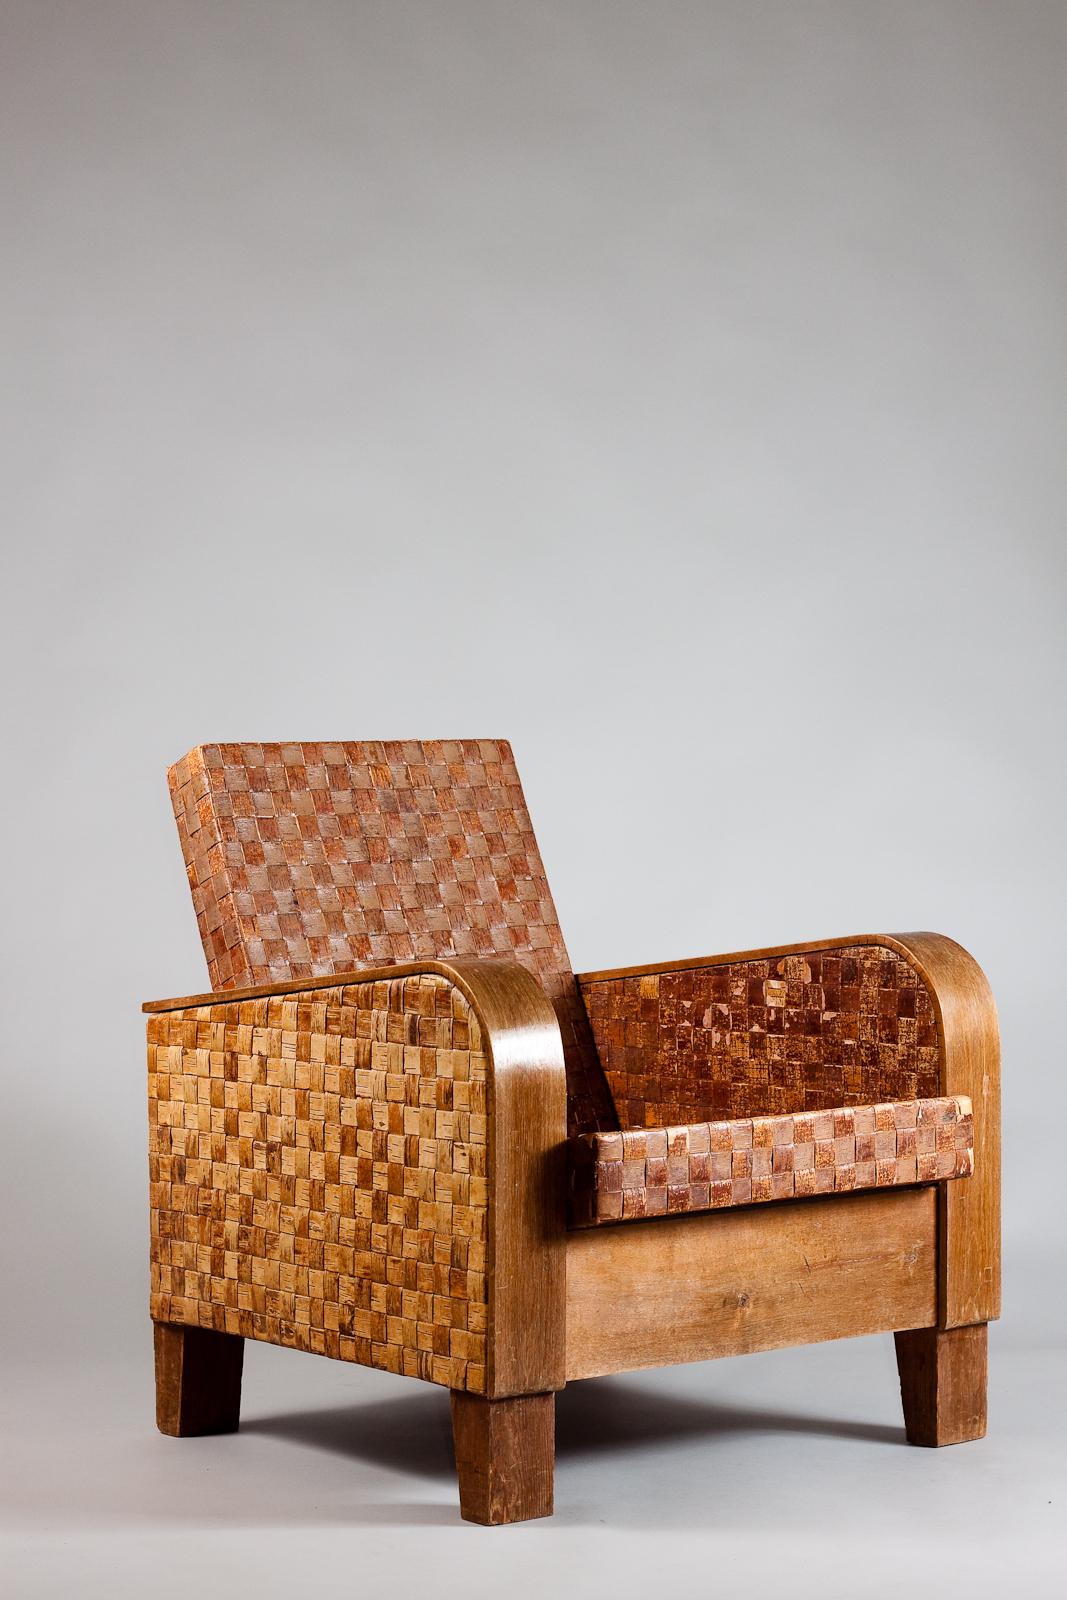 Unique hand-made lounge chair made from birch bark during the war-time in Finland. With its natural colour the chair will pop up like a piece of art. This is a real collectors item and also for the interior designer to include a piece of art in the